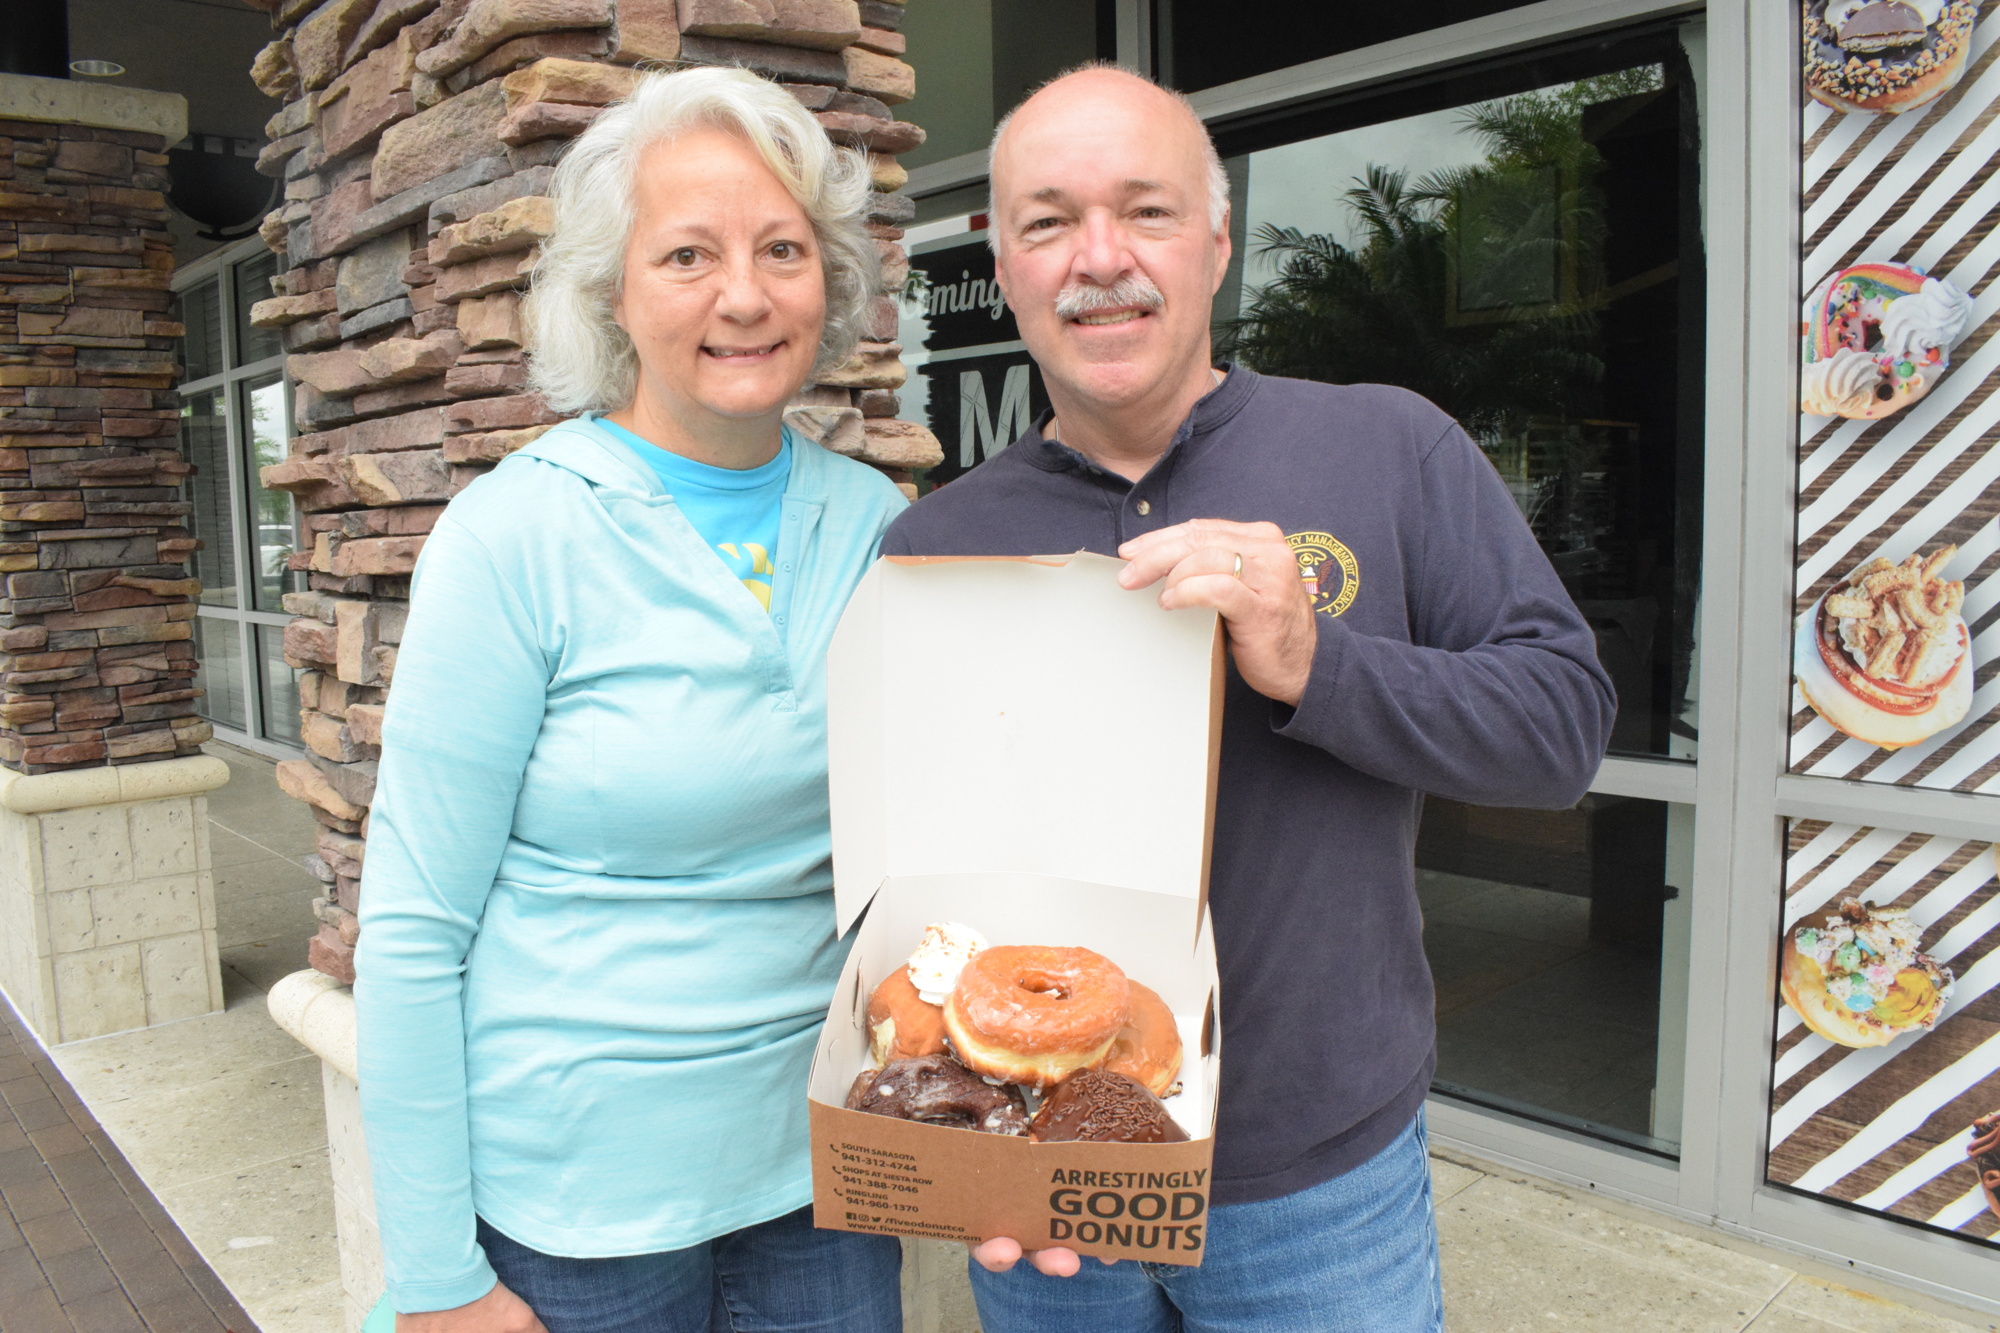 Christine Nordstrom, owner of Five-O Donut Co., says she is excited to open a new location at University Town Center. (Photo by Liz Ramos)